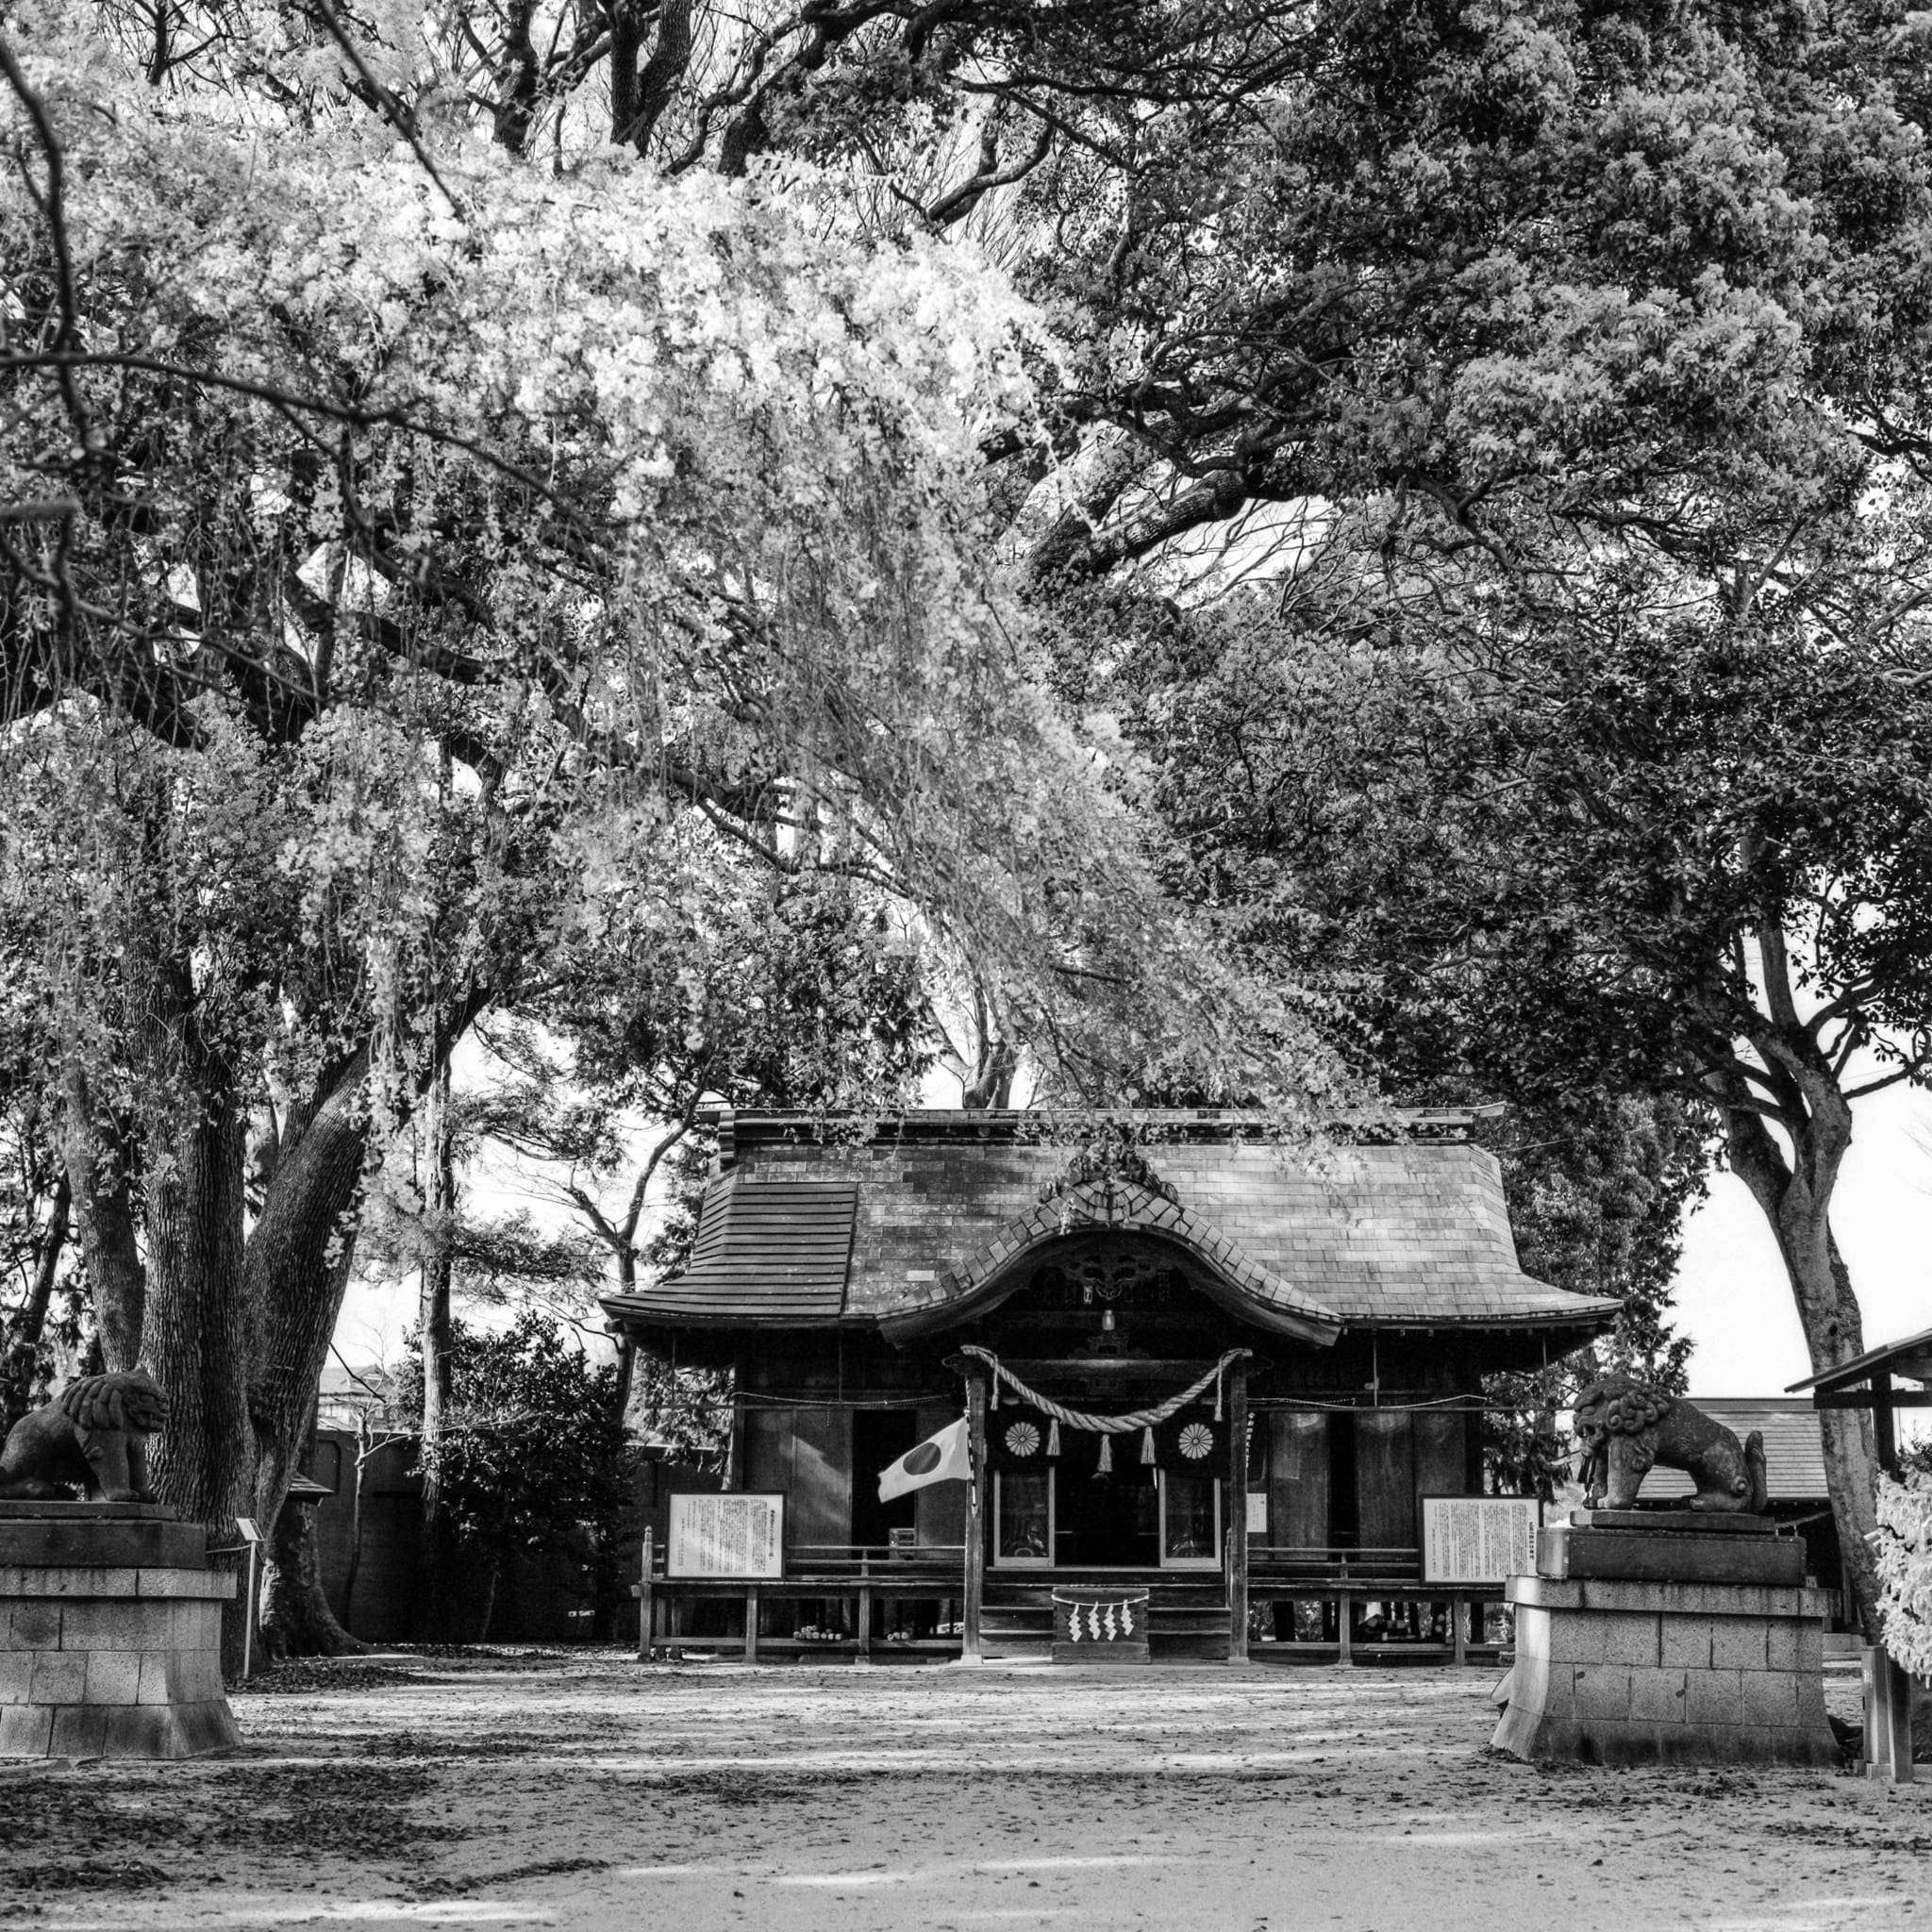 Traditional Shinto shrine with lanterns and blossoms in serene black and white photograph.